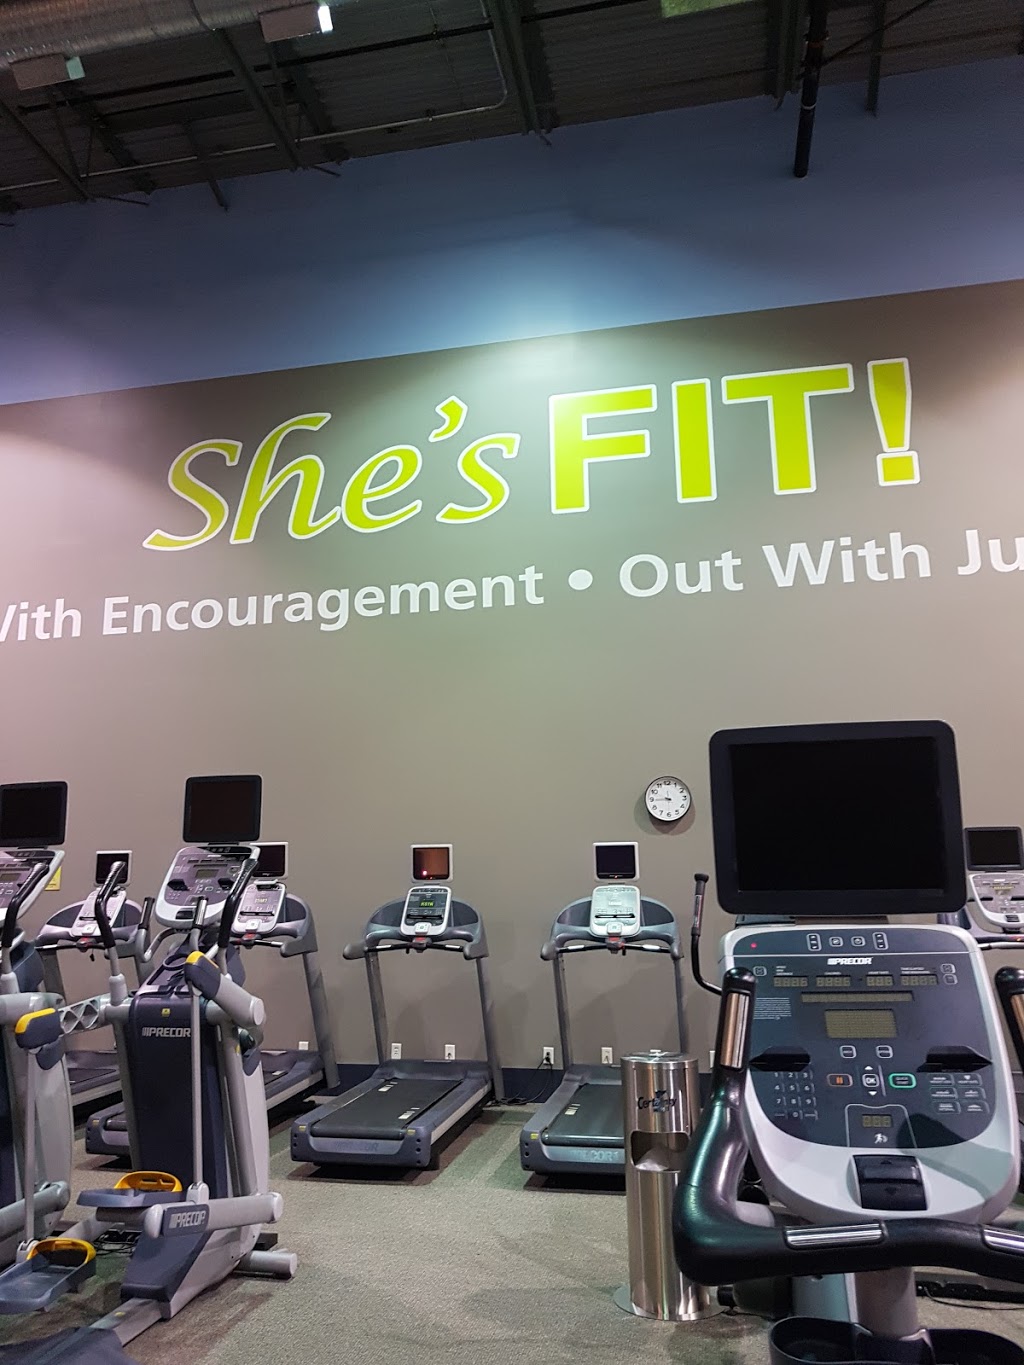 Shes FIT! Langley | gym | 6039 196 St, Surrey, BC V3S 7X4, Canada | 6045329910 OR +1 604-532-9910